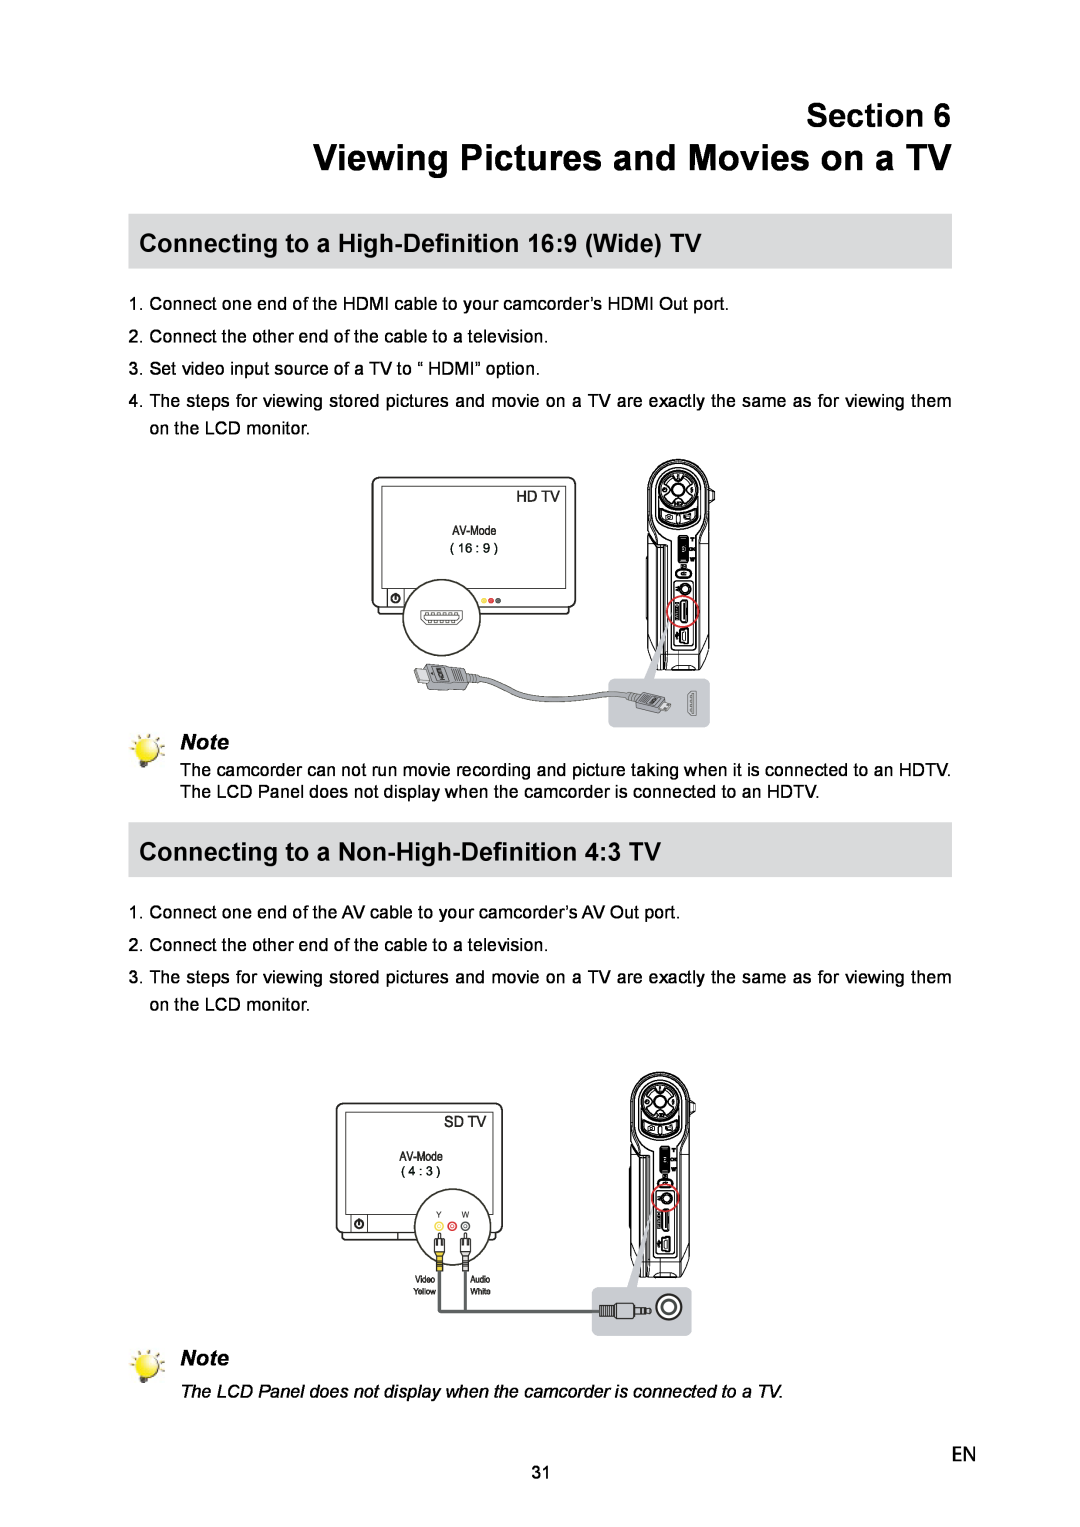 Toshiba P10 user manual Viewing Pictures and Movies on a TV, Section 